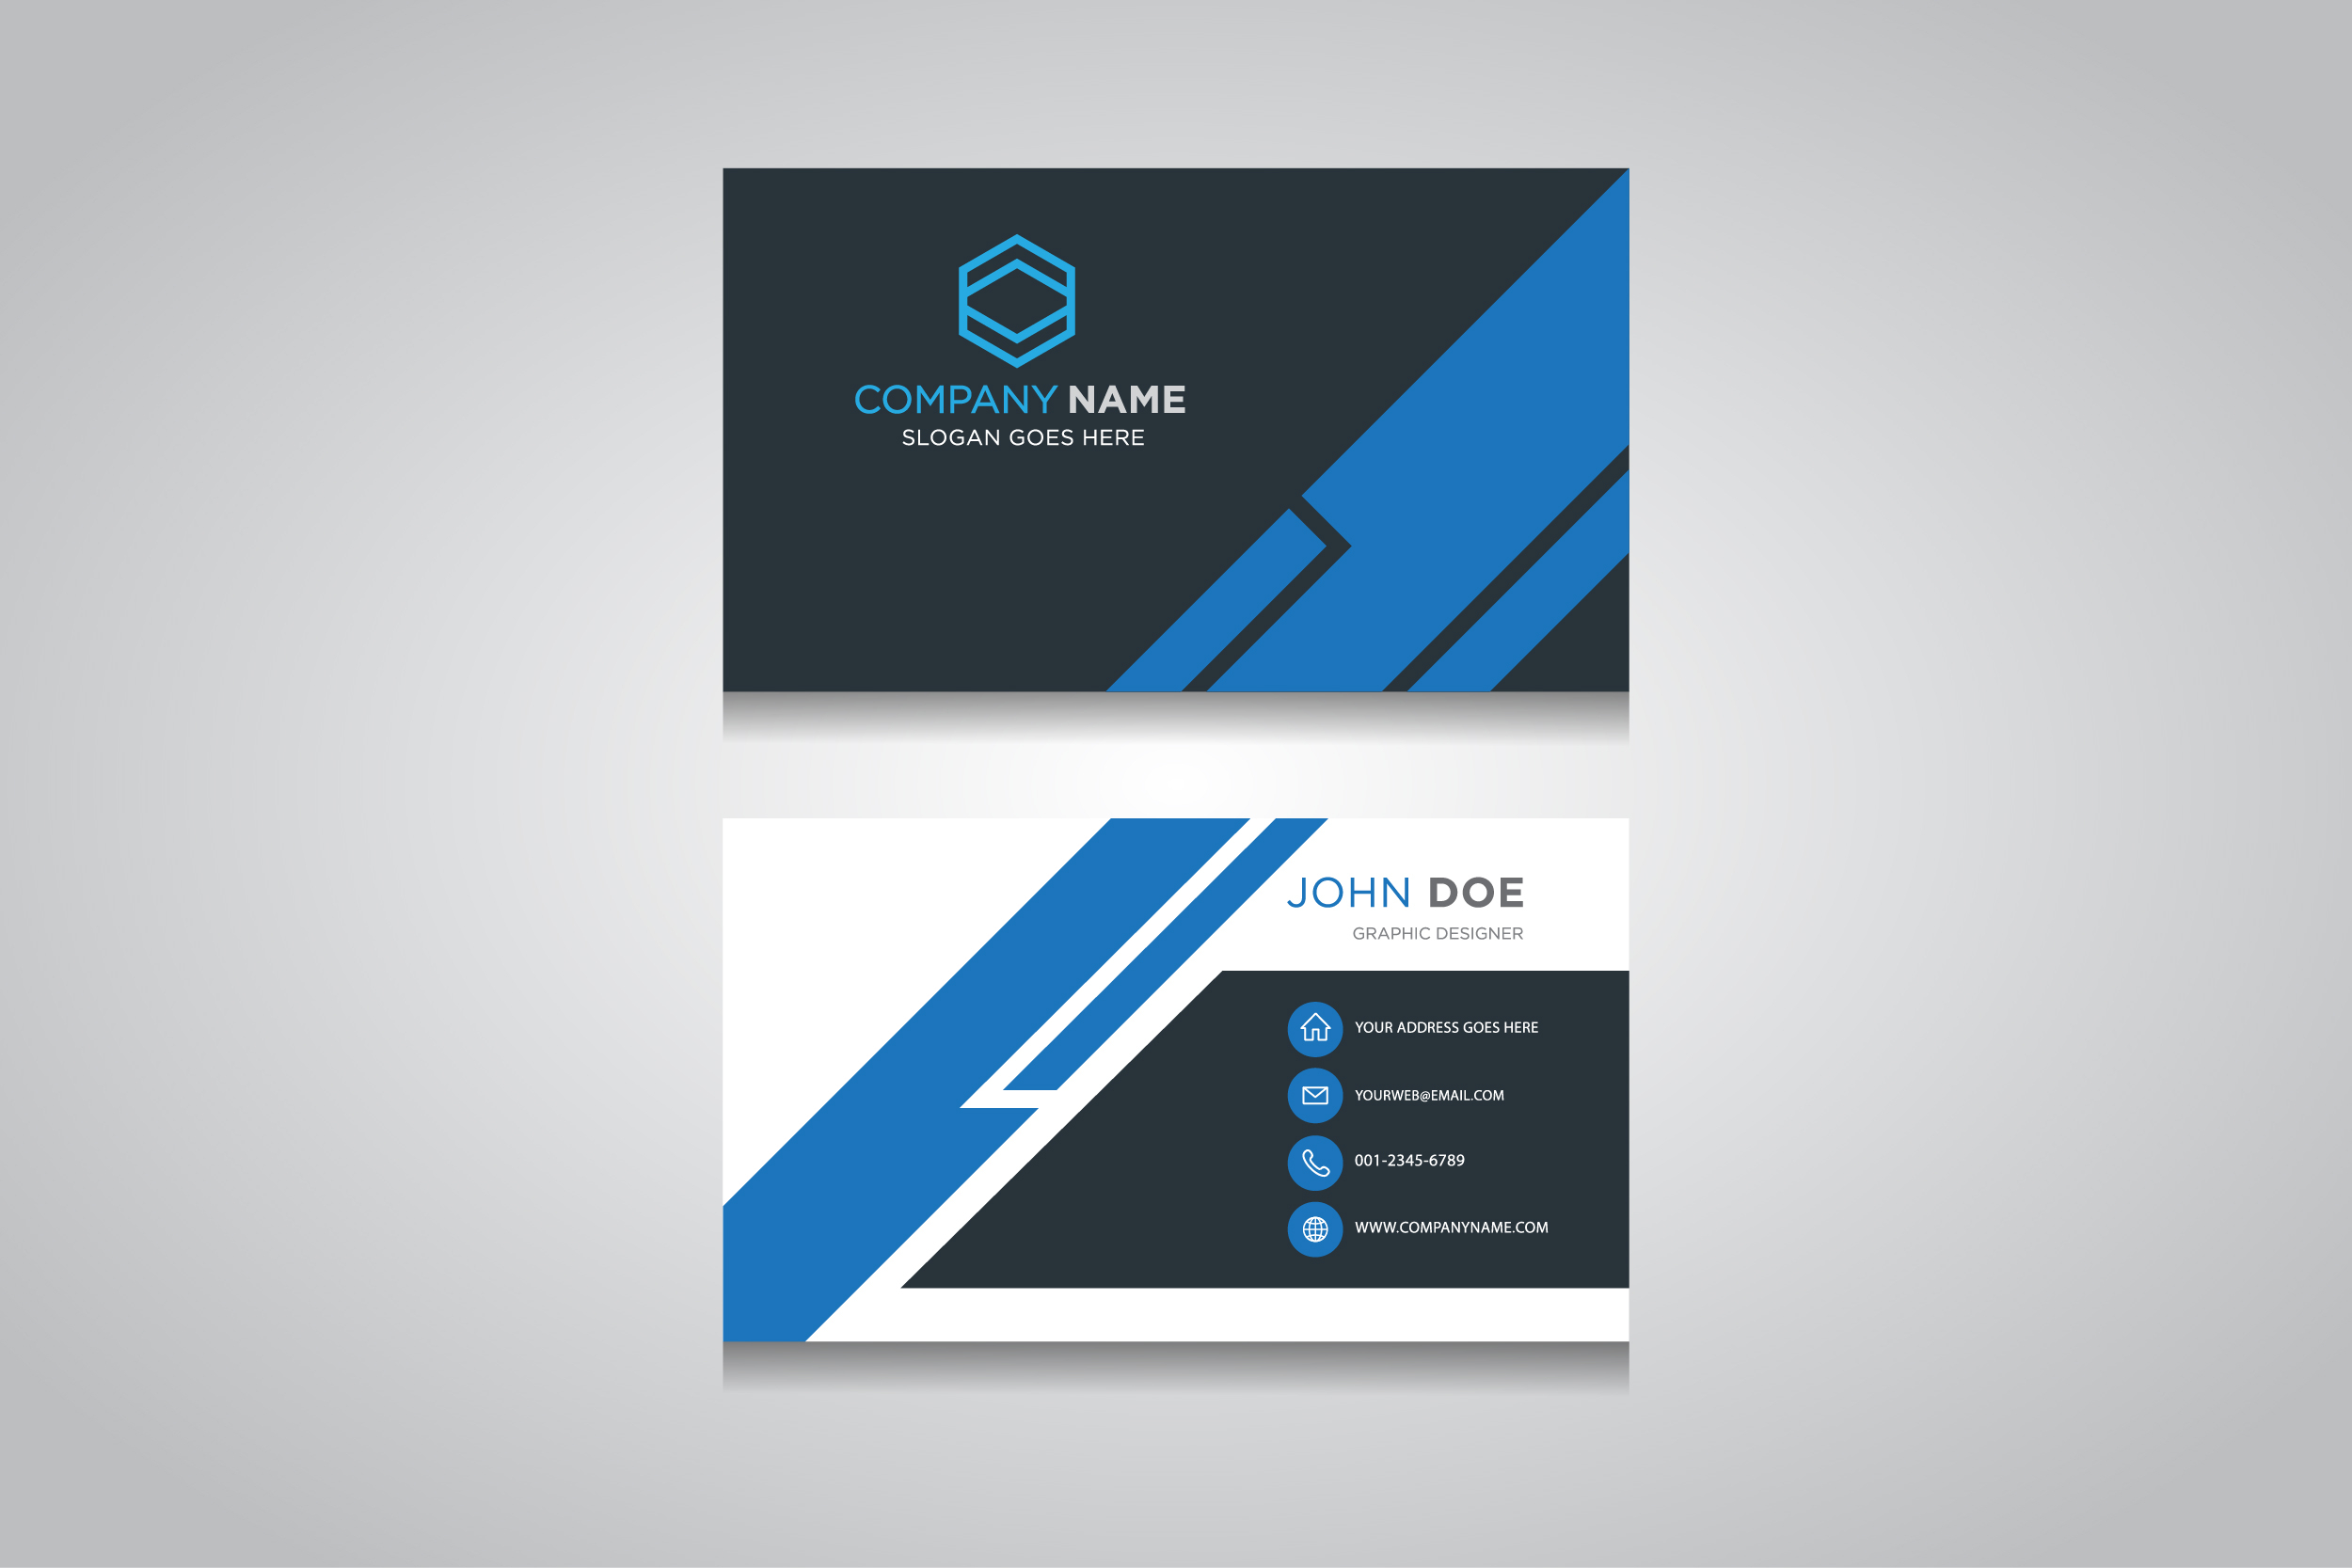 Business Card Template. Creative Business Card Intended For Company Business Cards Templates